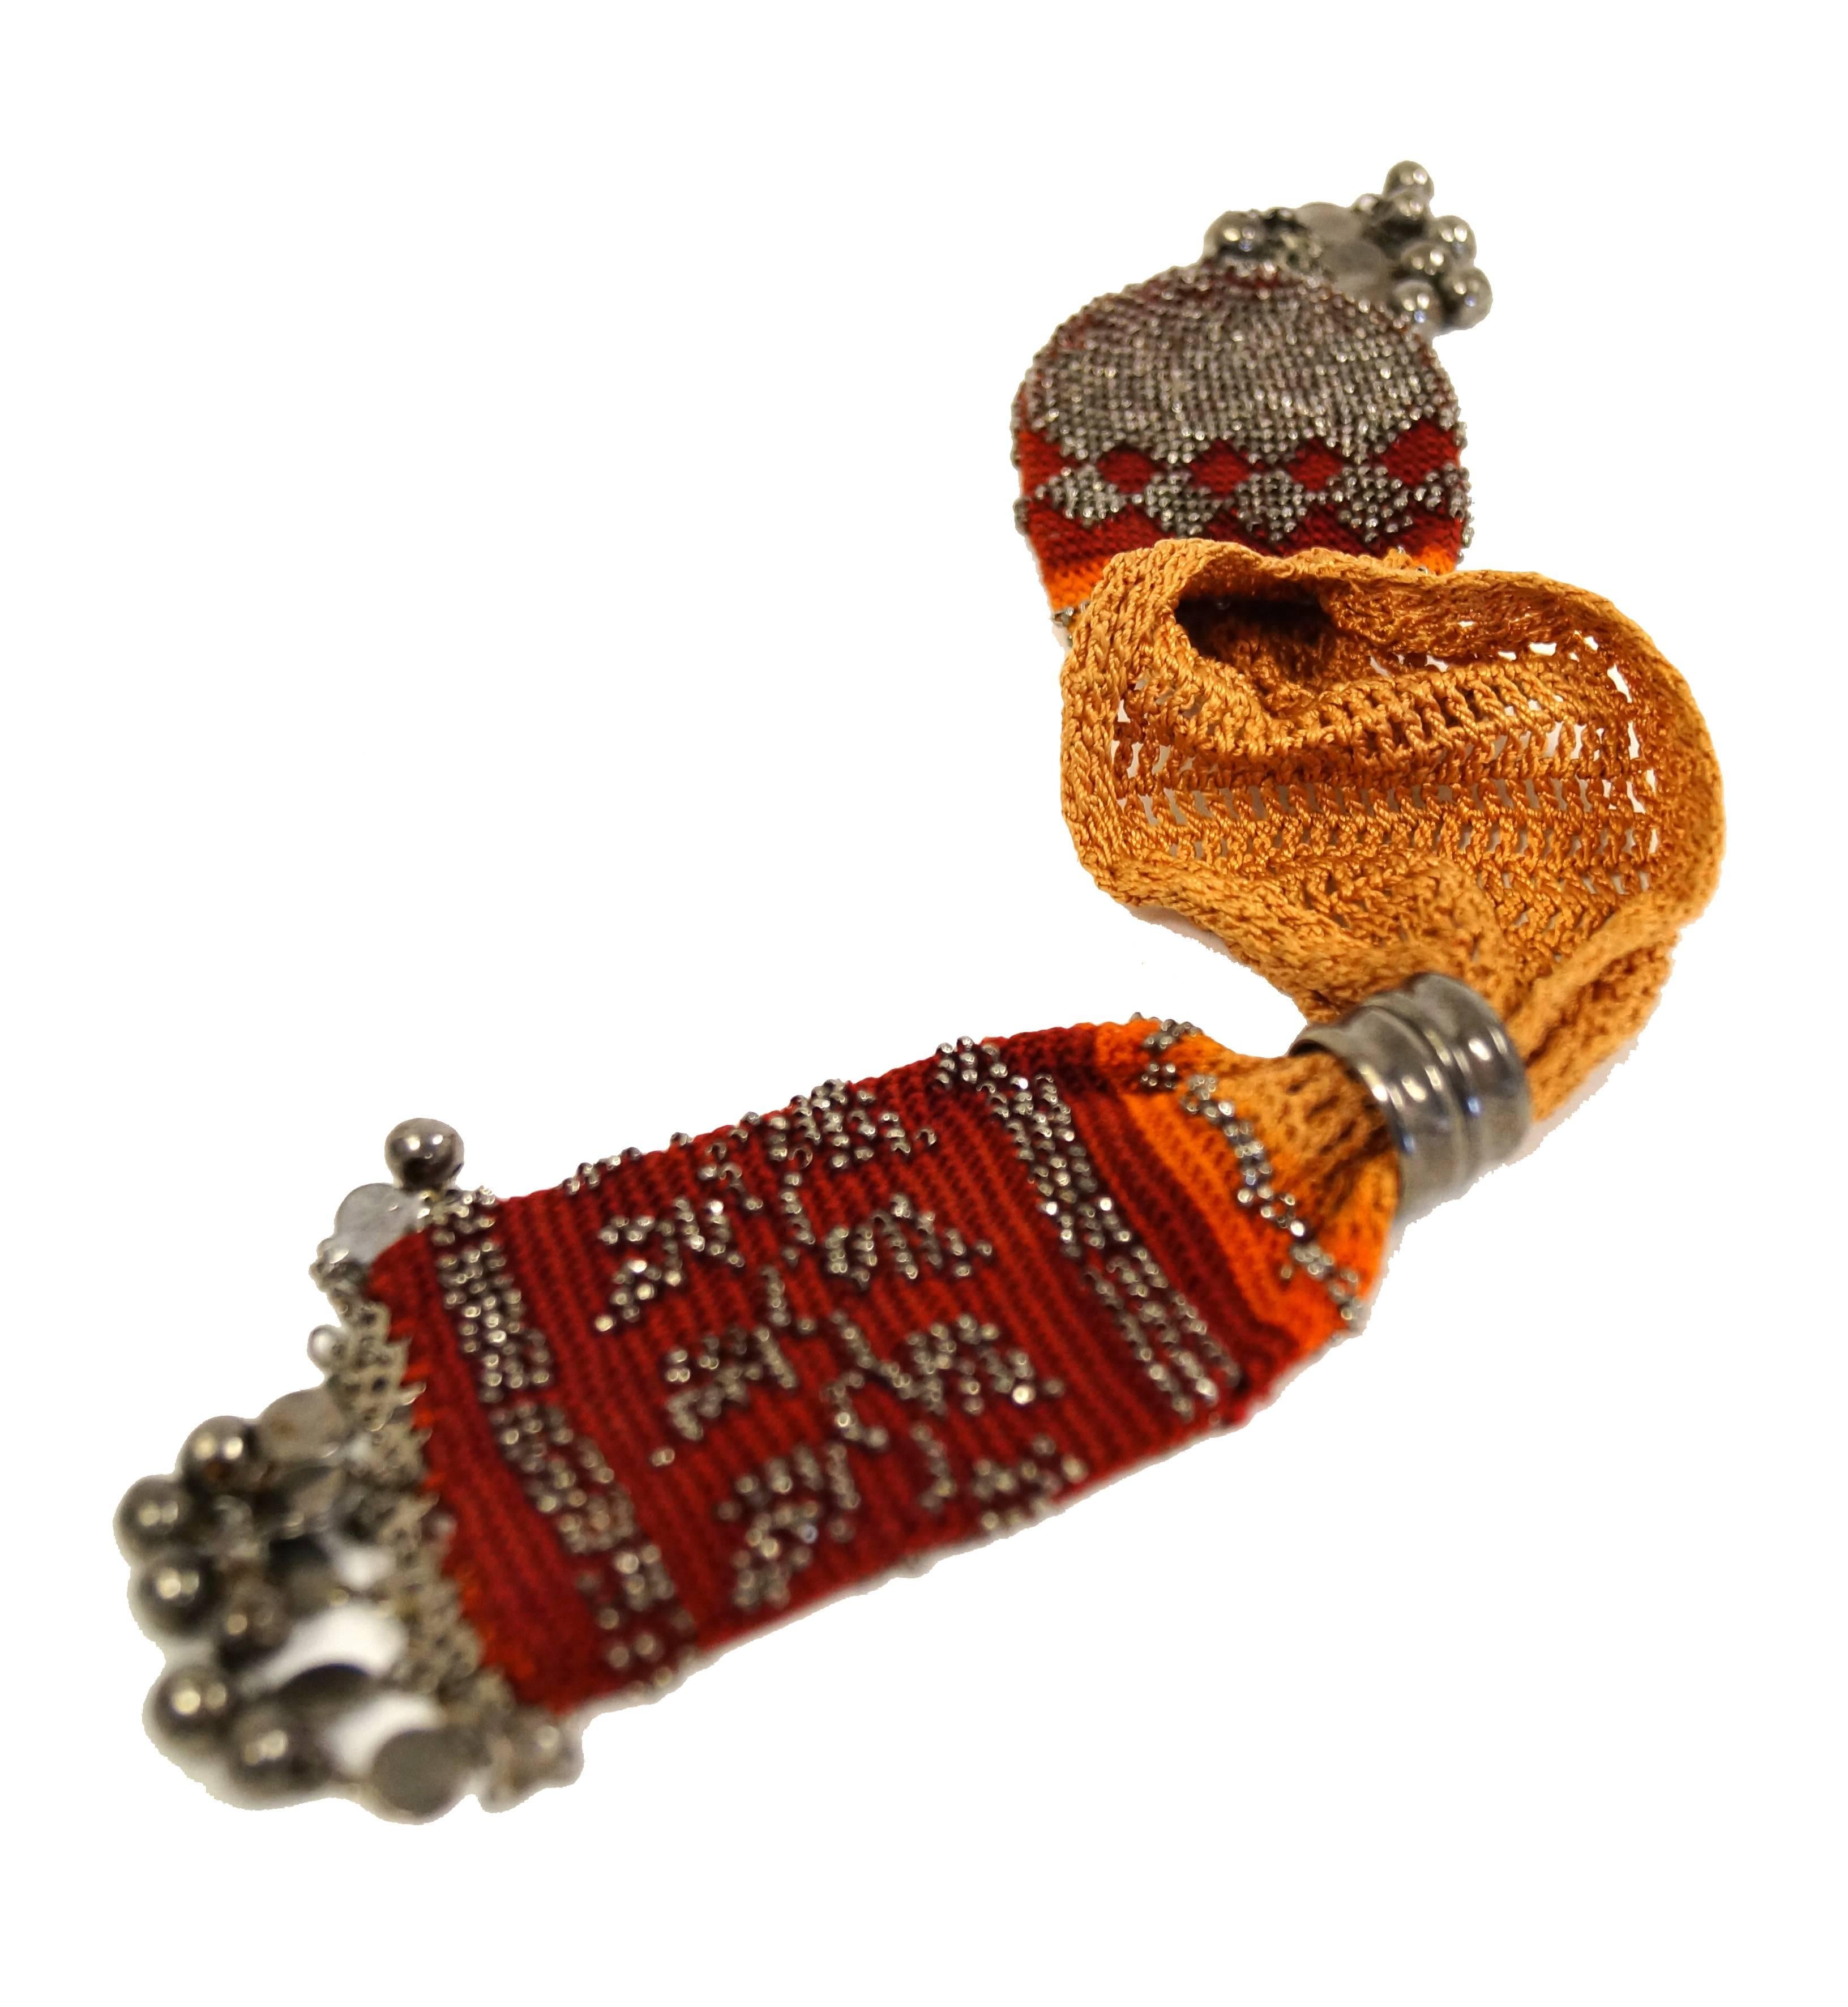 Fantastic orange and burgundy hand made crochet miser's purse with rough hewn multifaceted beads. This fine example of mid 19th century fashion is meticulously sewn in a vine and argyle diamond pattern.  The bag has metal spherical beads dangling